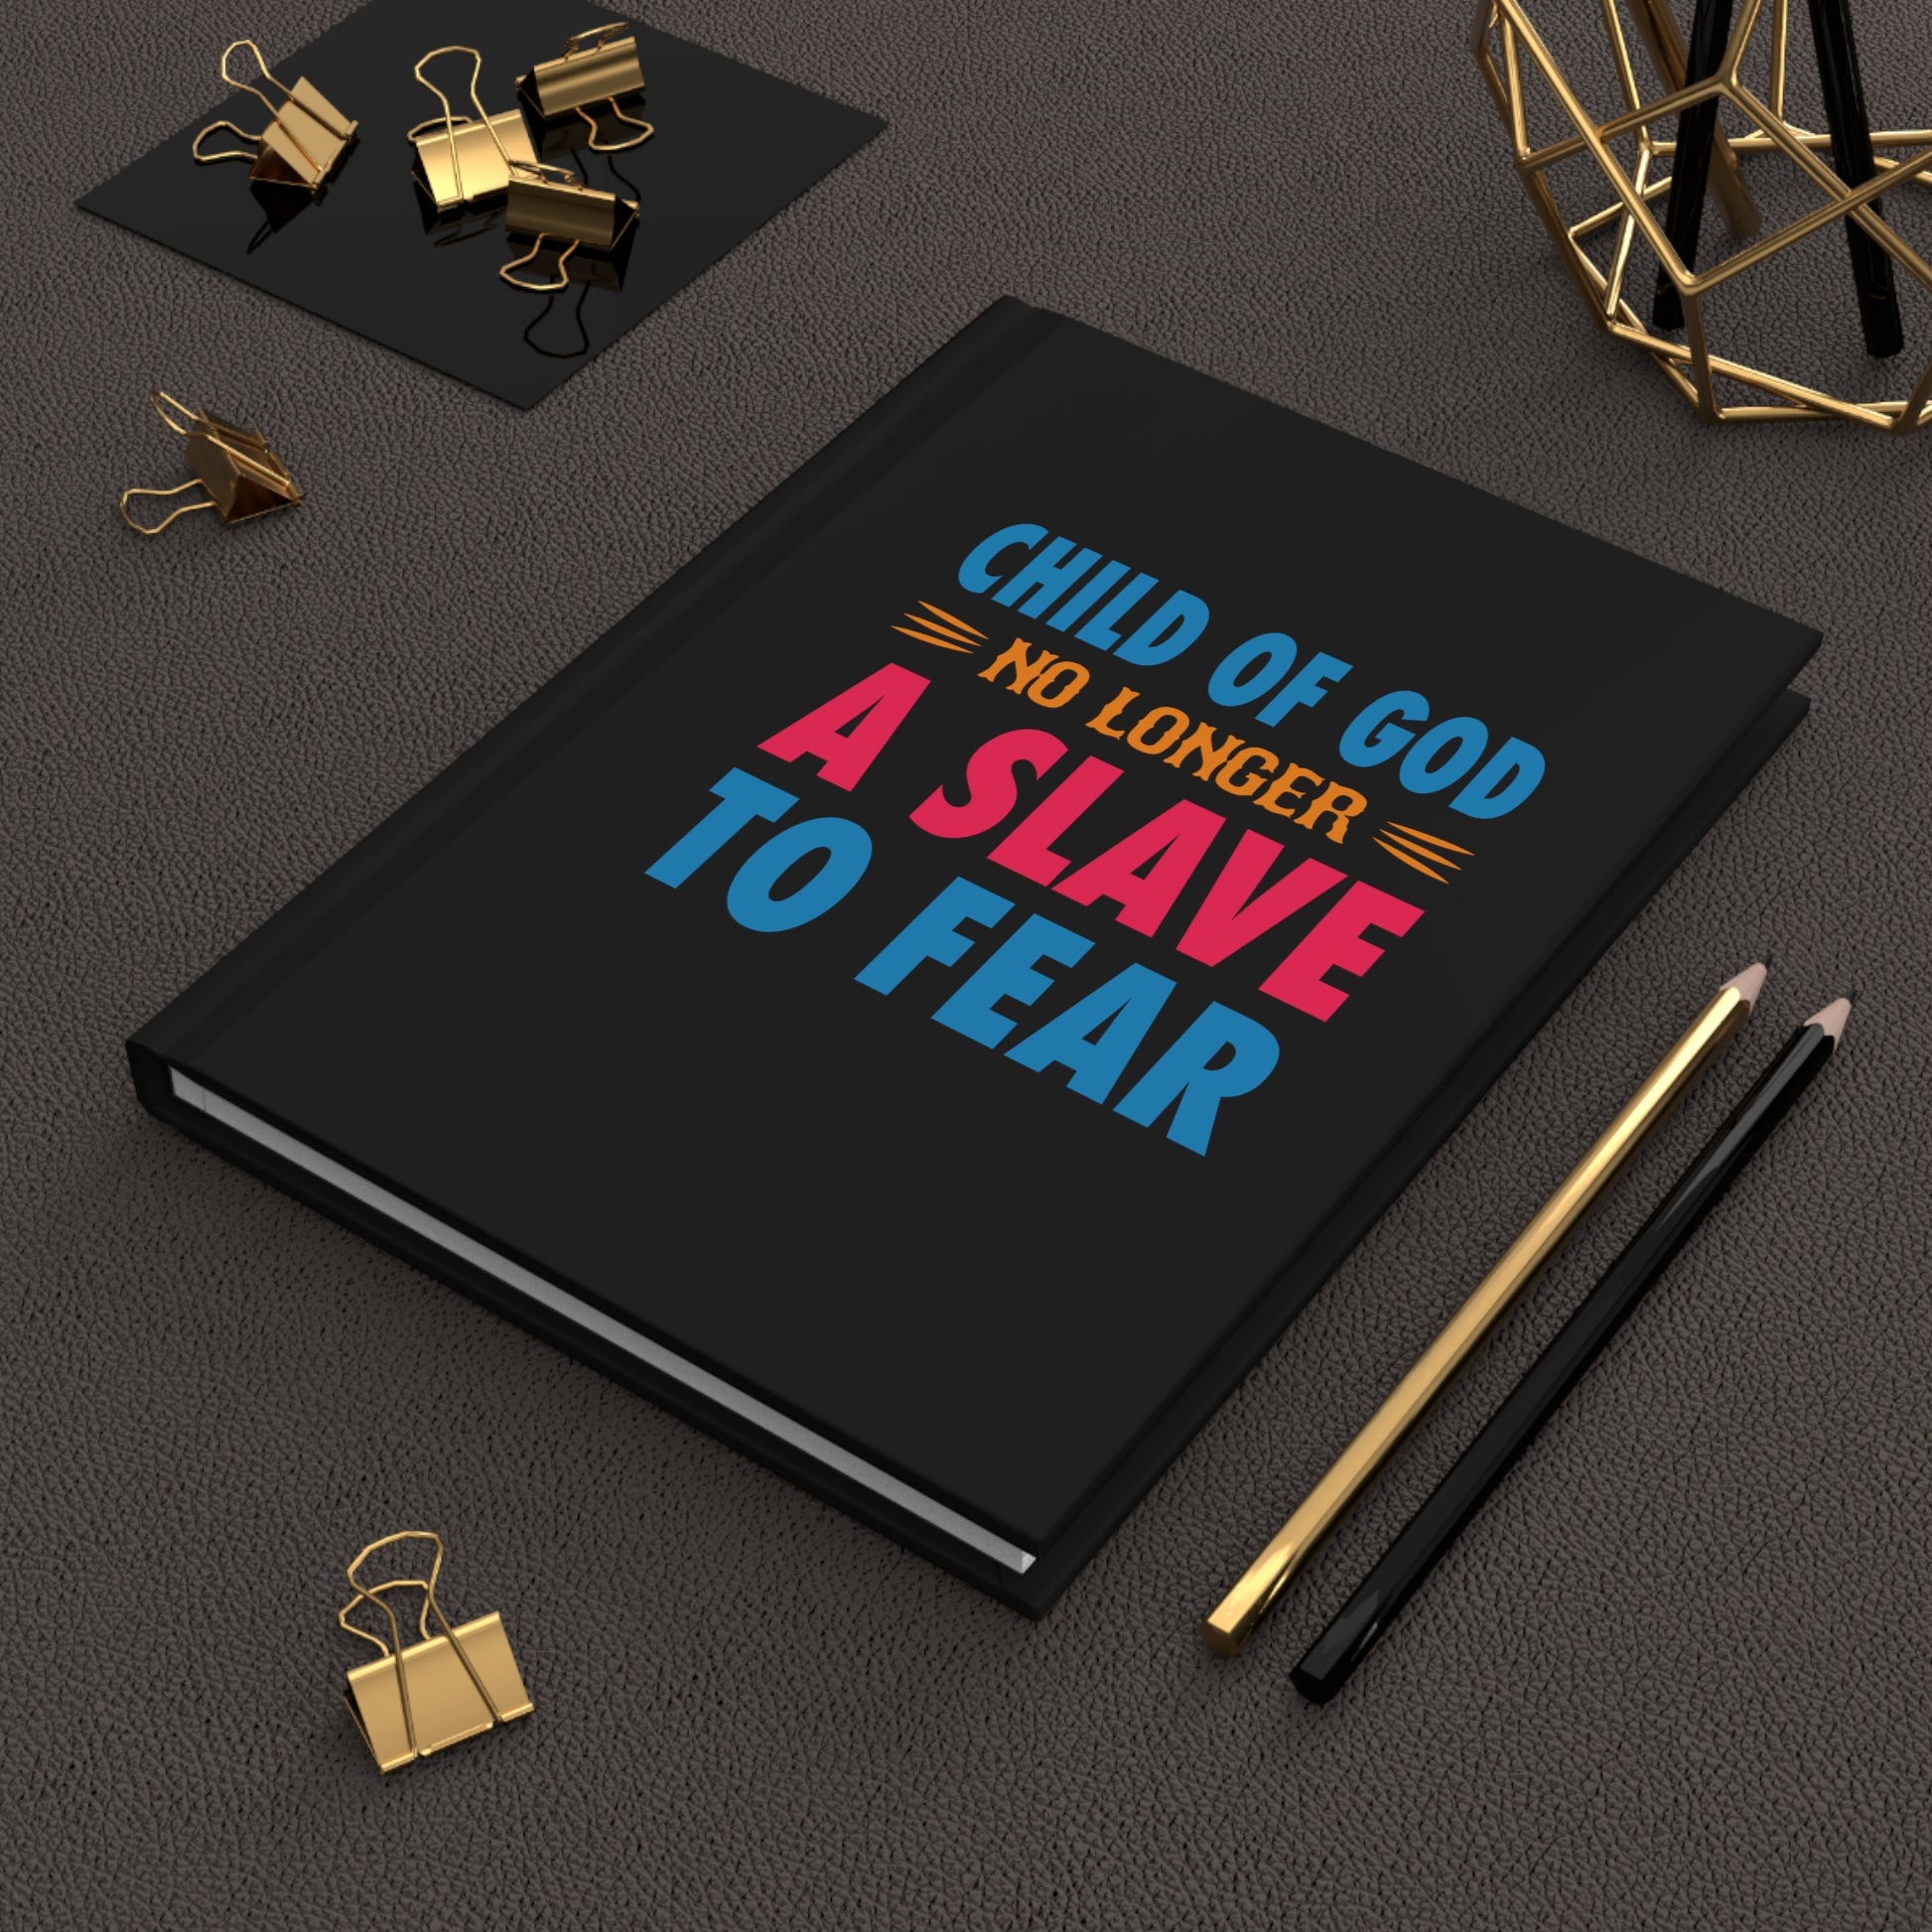 Child Of God No Longer A Slave To Fear Christian Hardcover Journal Matte Printify